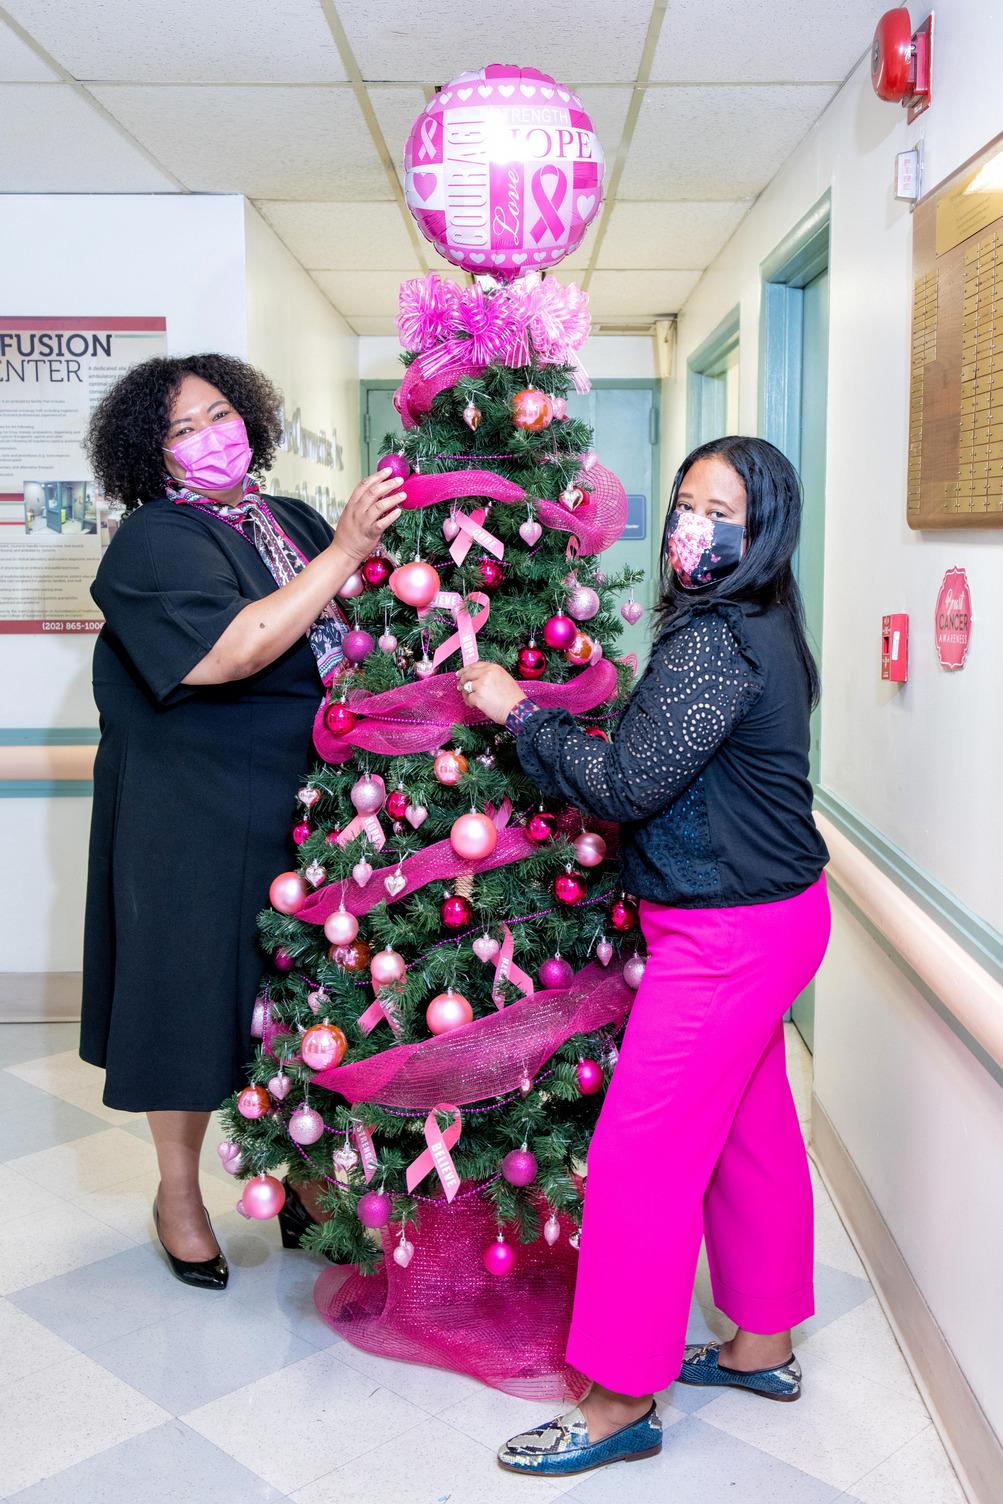 Two people decorate evergreen with pink decor for breast cancer awareness month